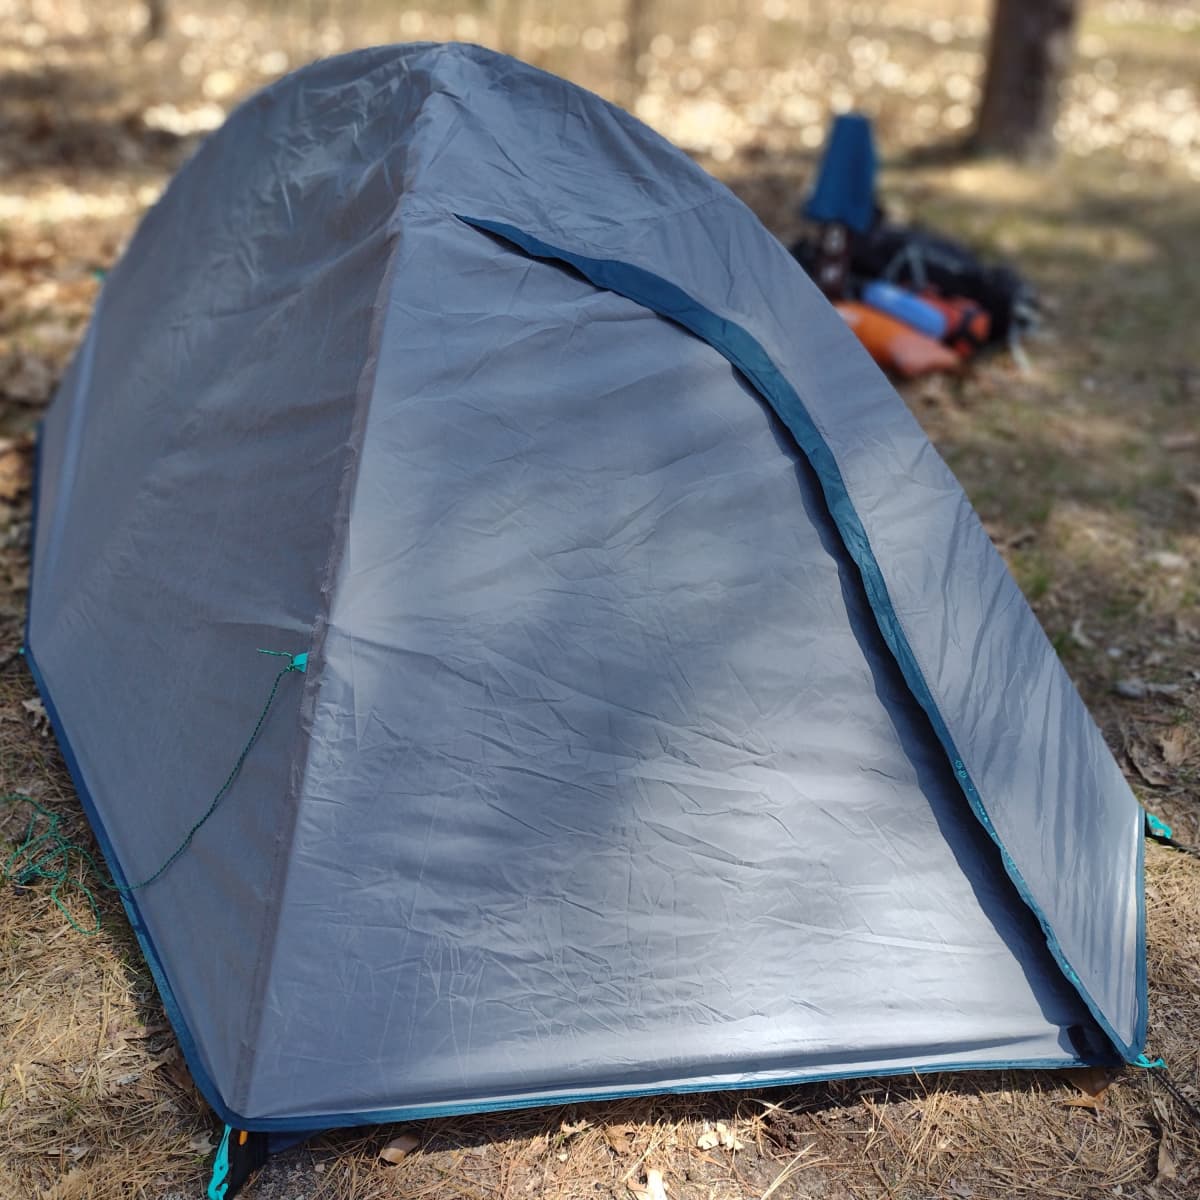 Decathlon Quechua MH100: 2-Person Camping Tent Field Test, Review, and - SkyAboveUs